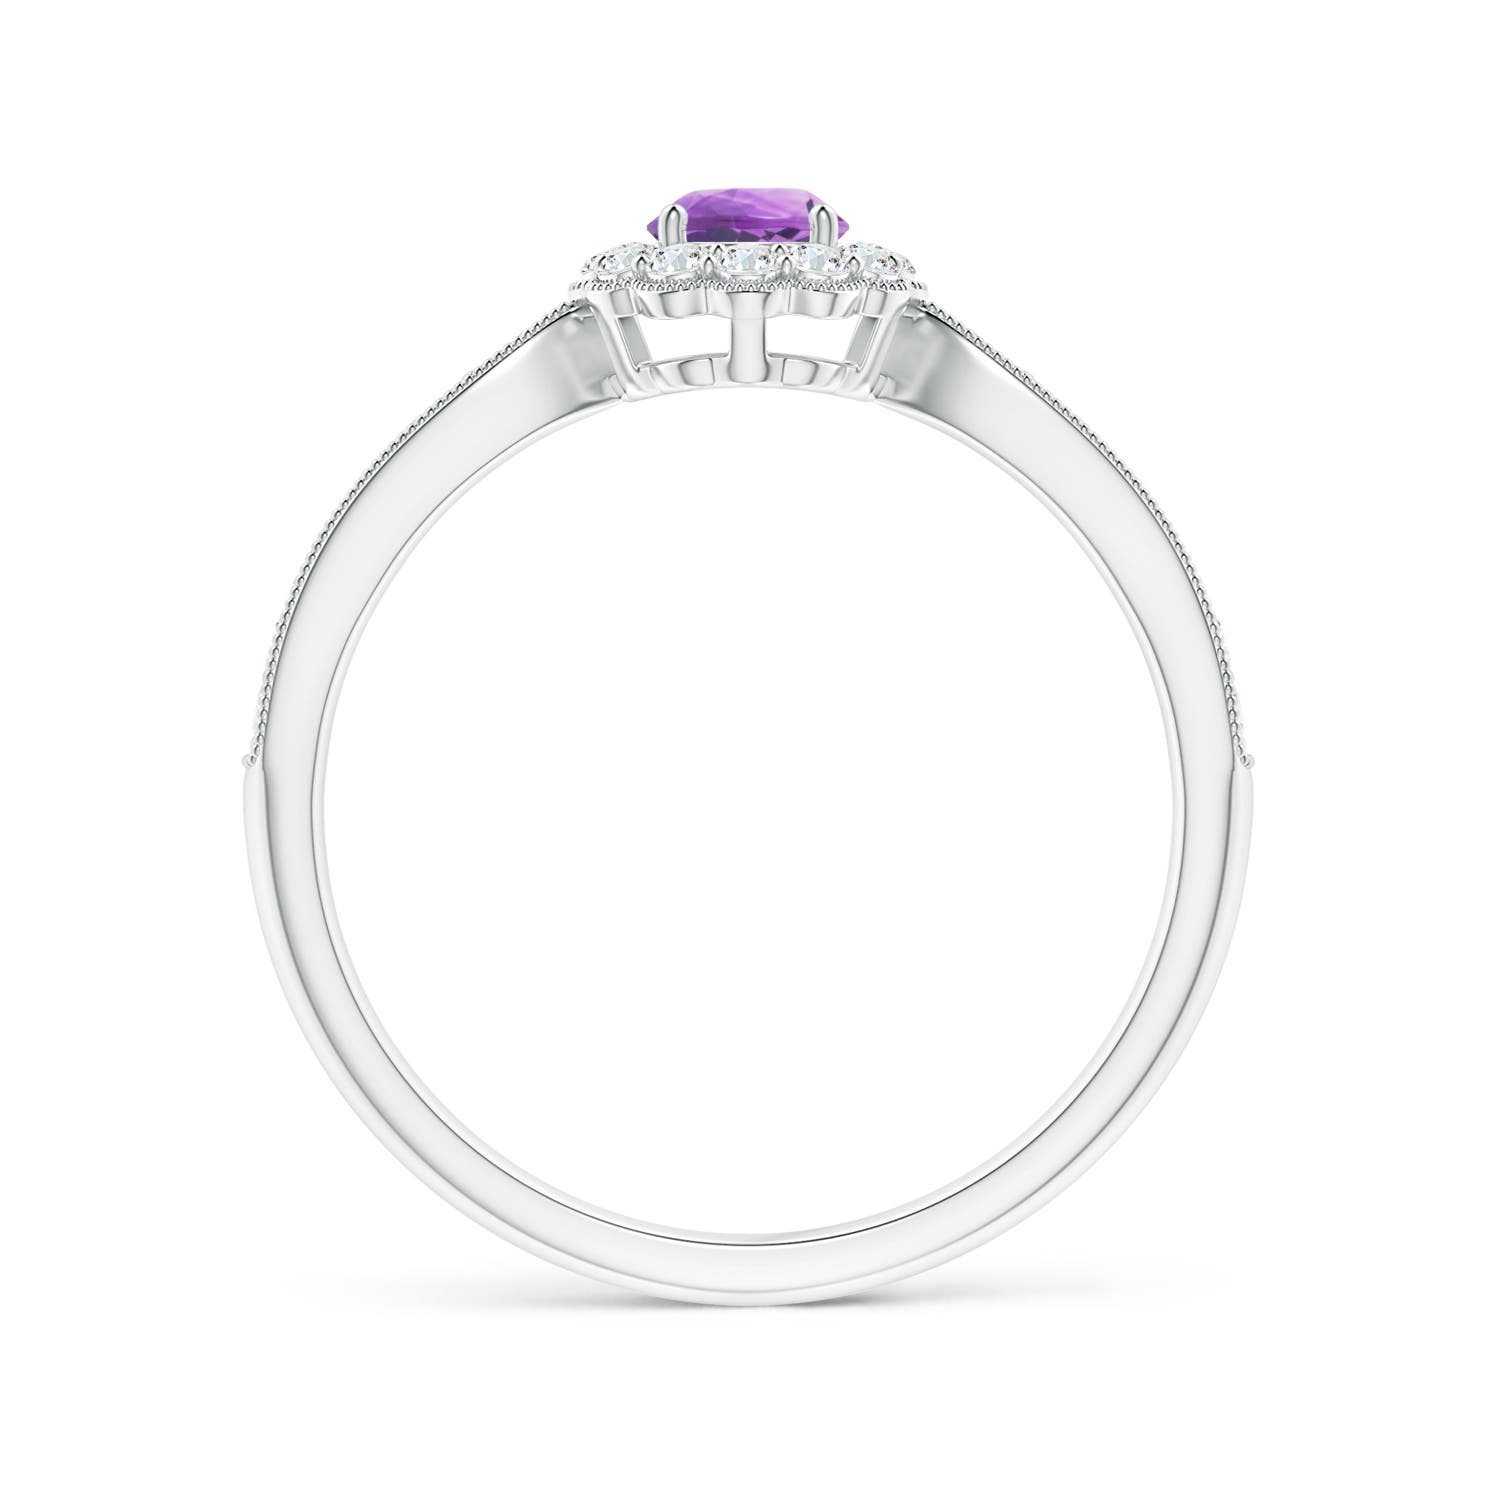 A - Amethyst / 0.5 CT / 14 KT White Gold